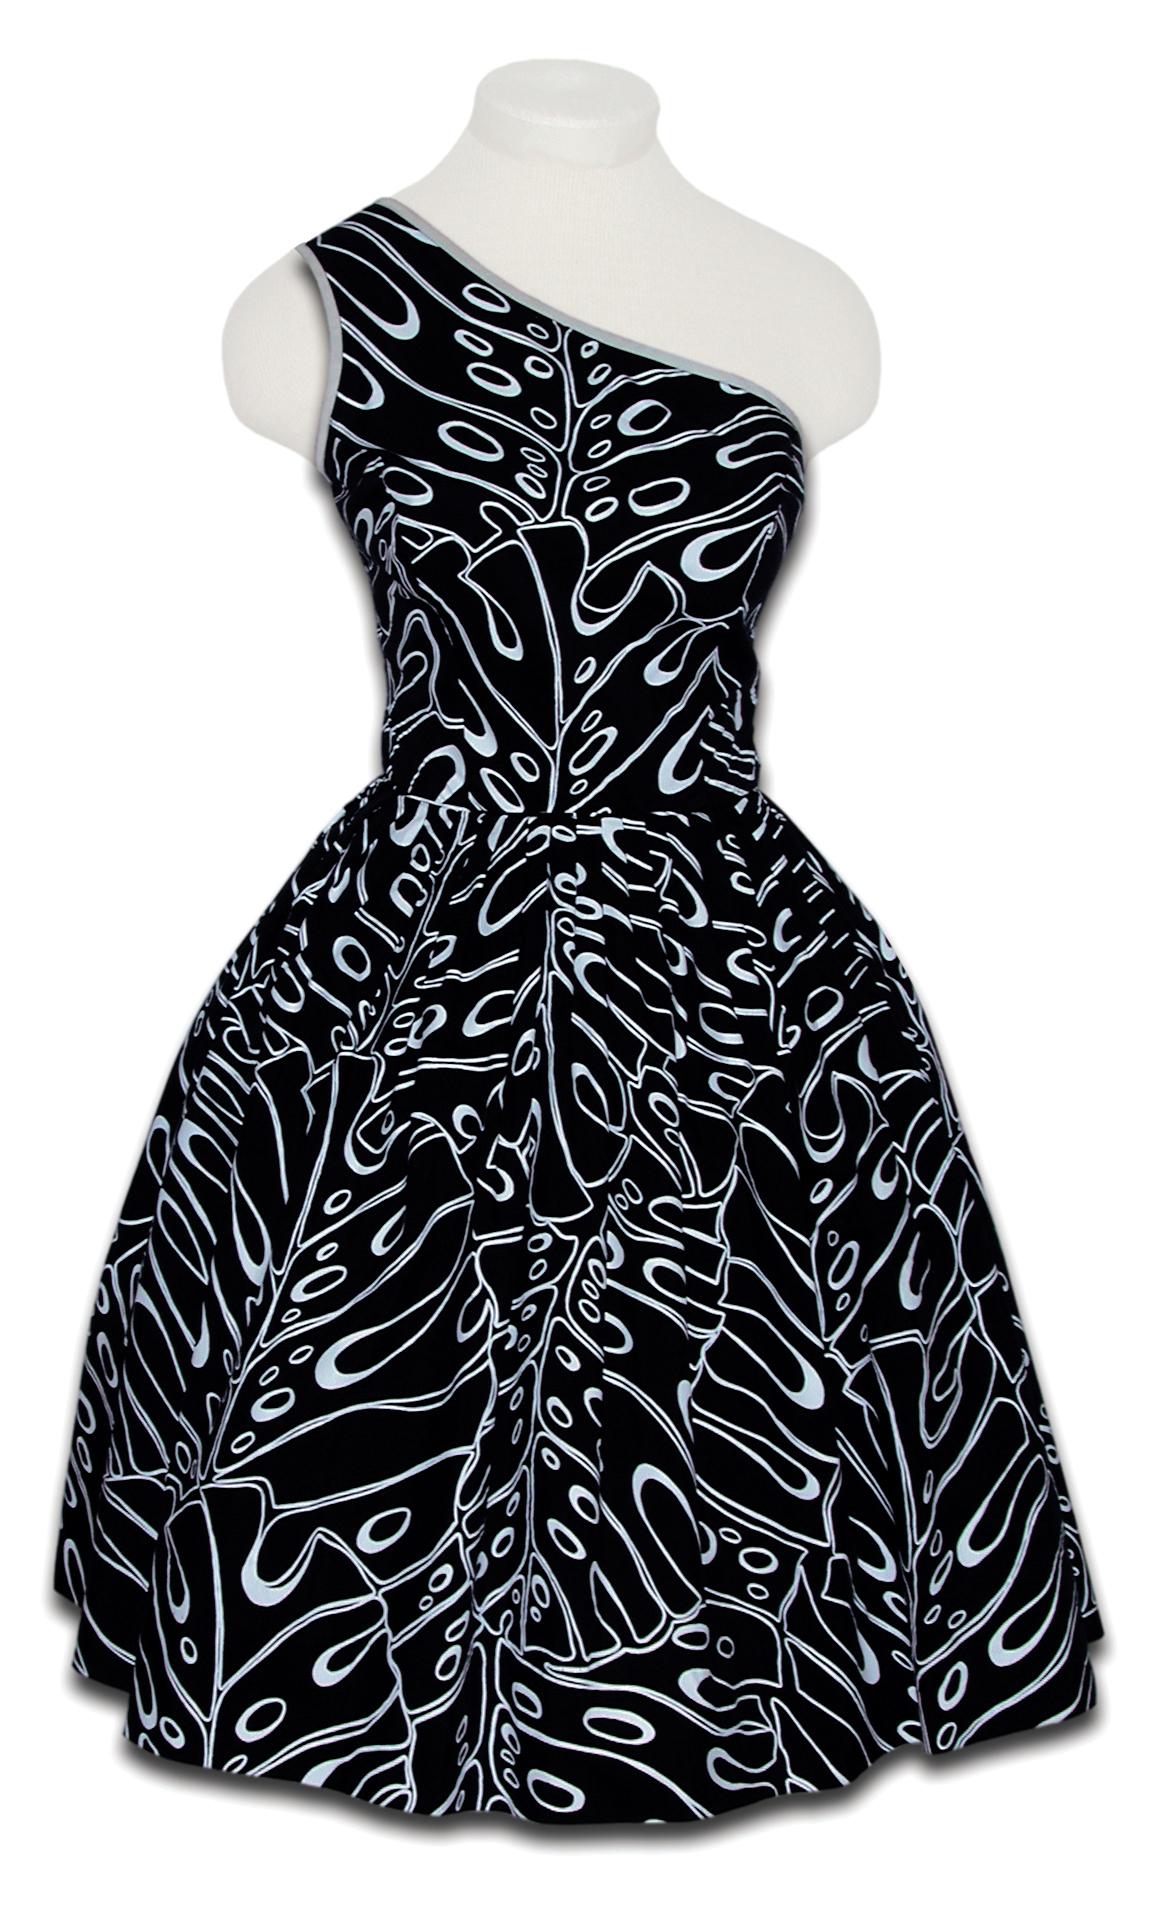 Black, one shouldered dress with a pattern of white monstera leaves